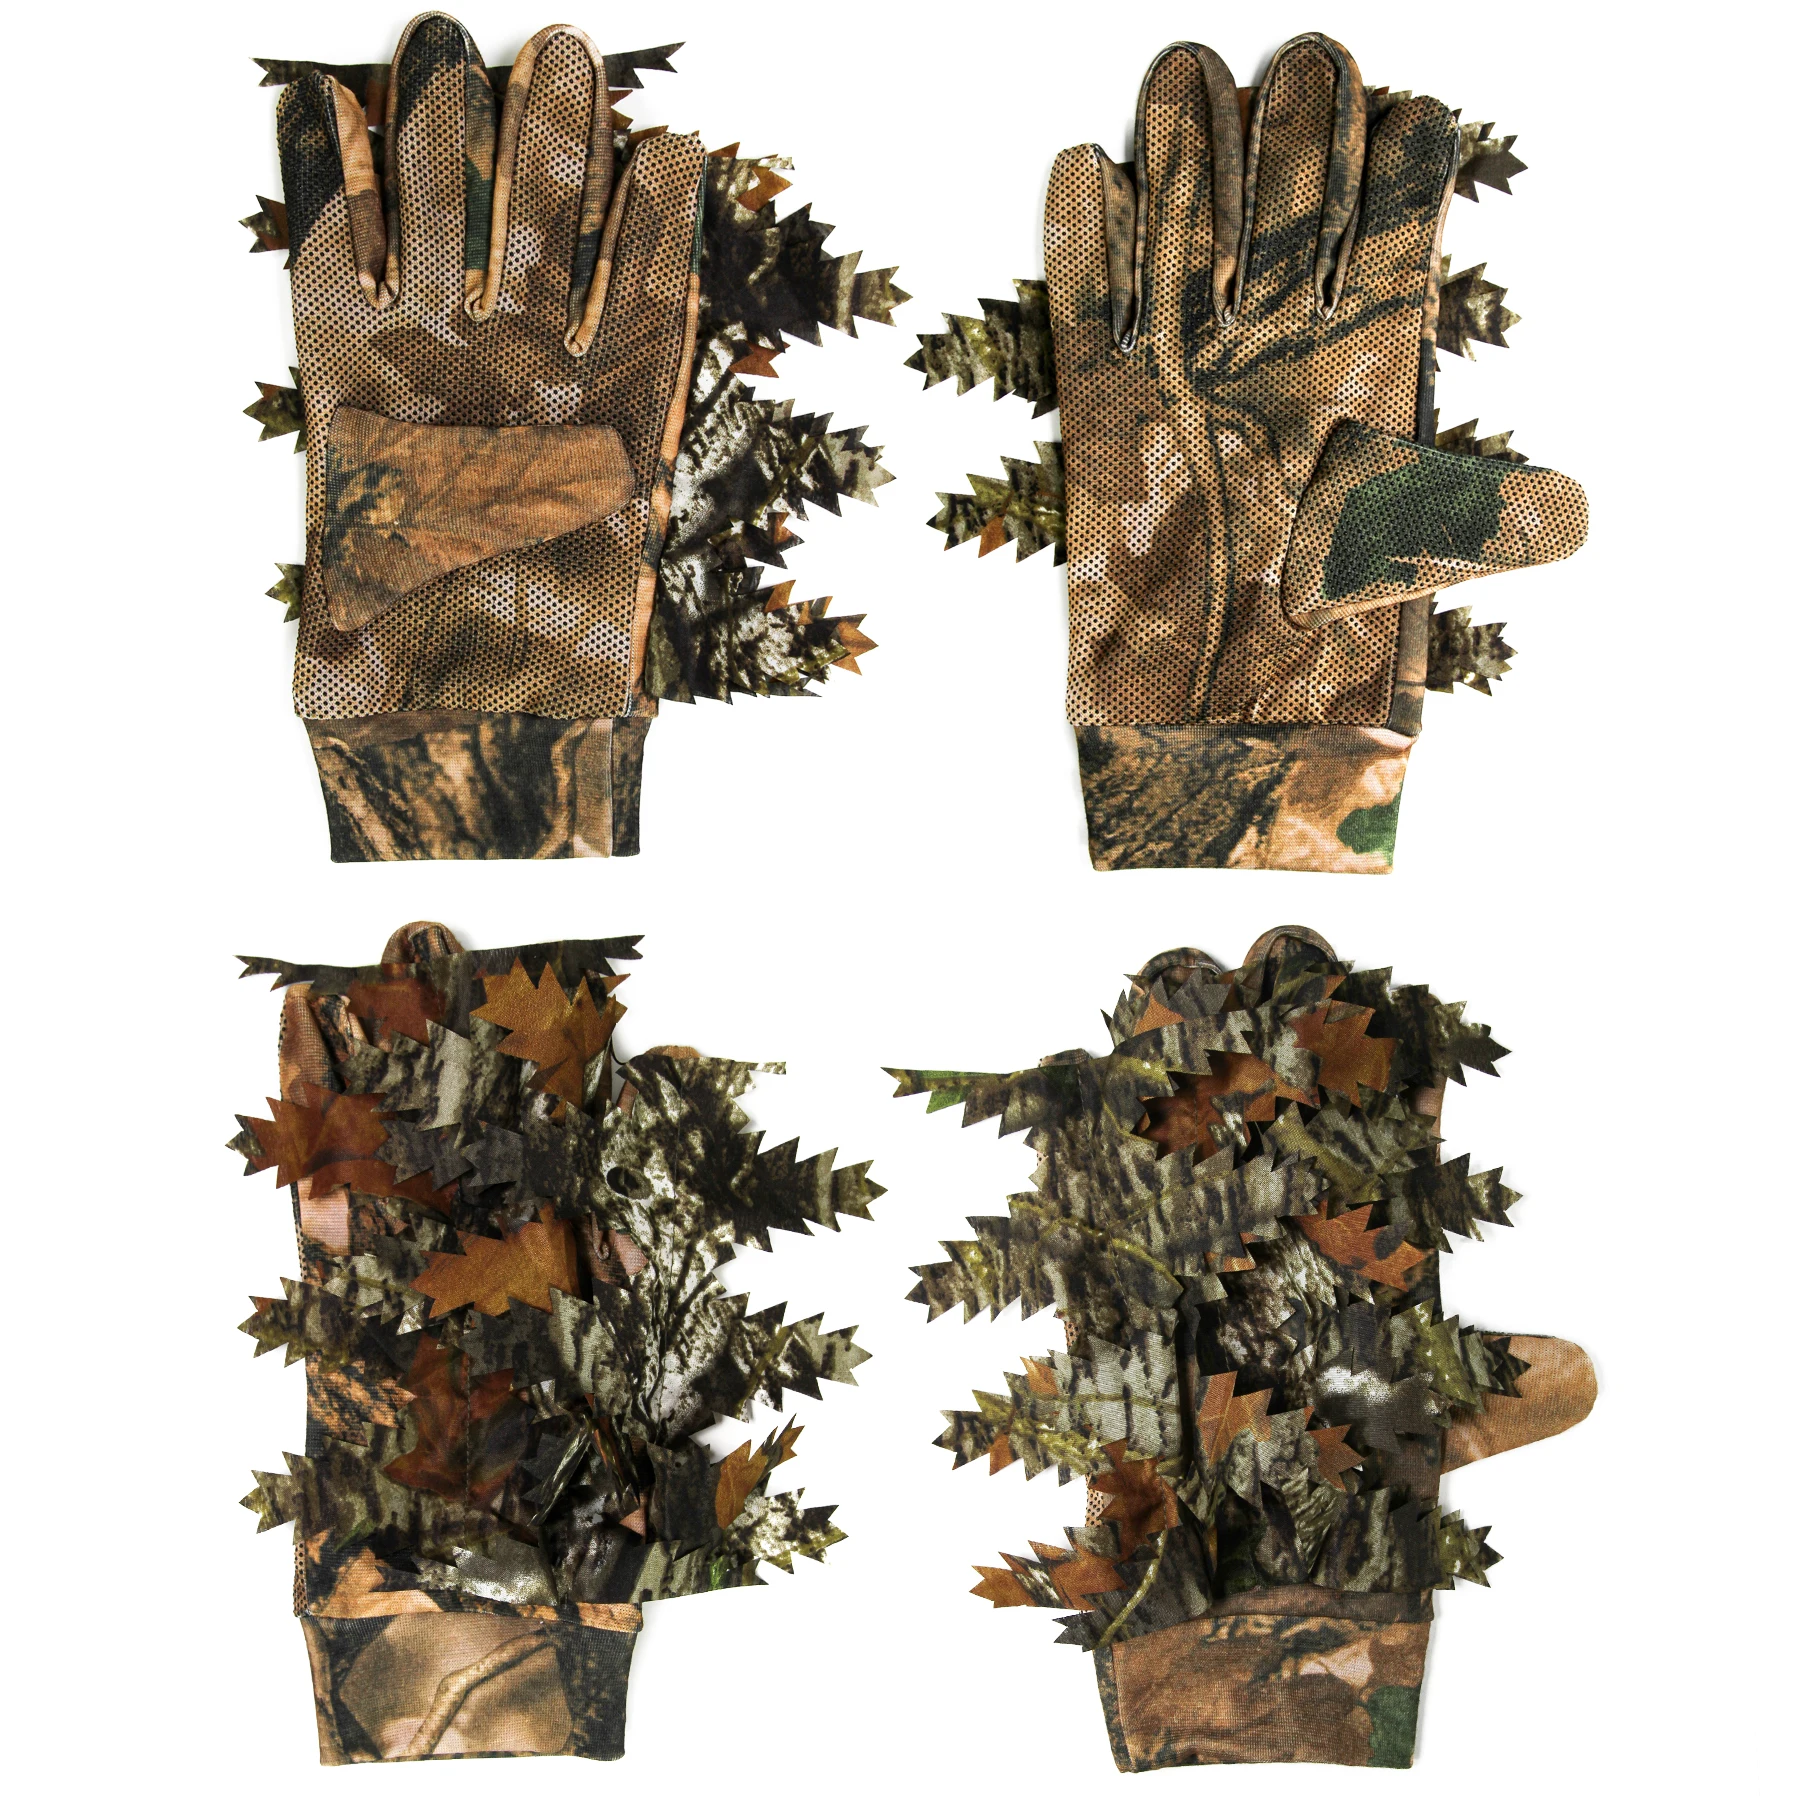 

GUGULUZA 3D Leaf Camo Gloves Polyester Non-slip Tactical Shooting Full Finger Gloves for Fishing Hunting Cycling CS Sports